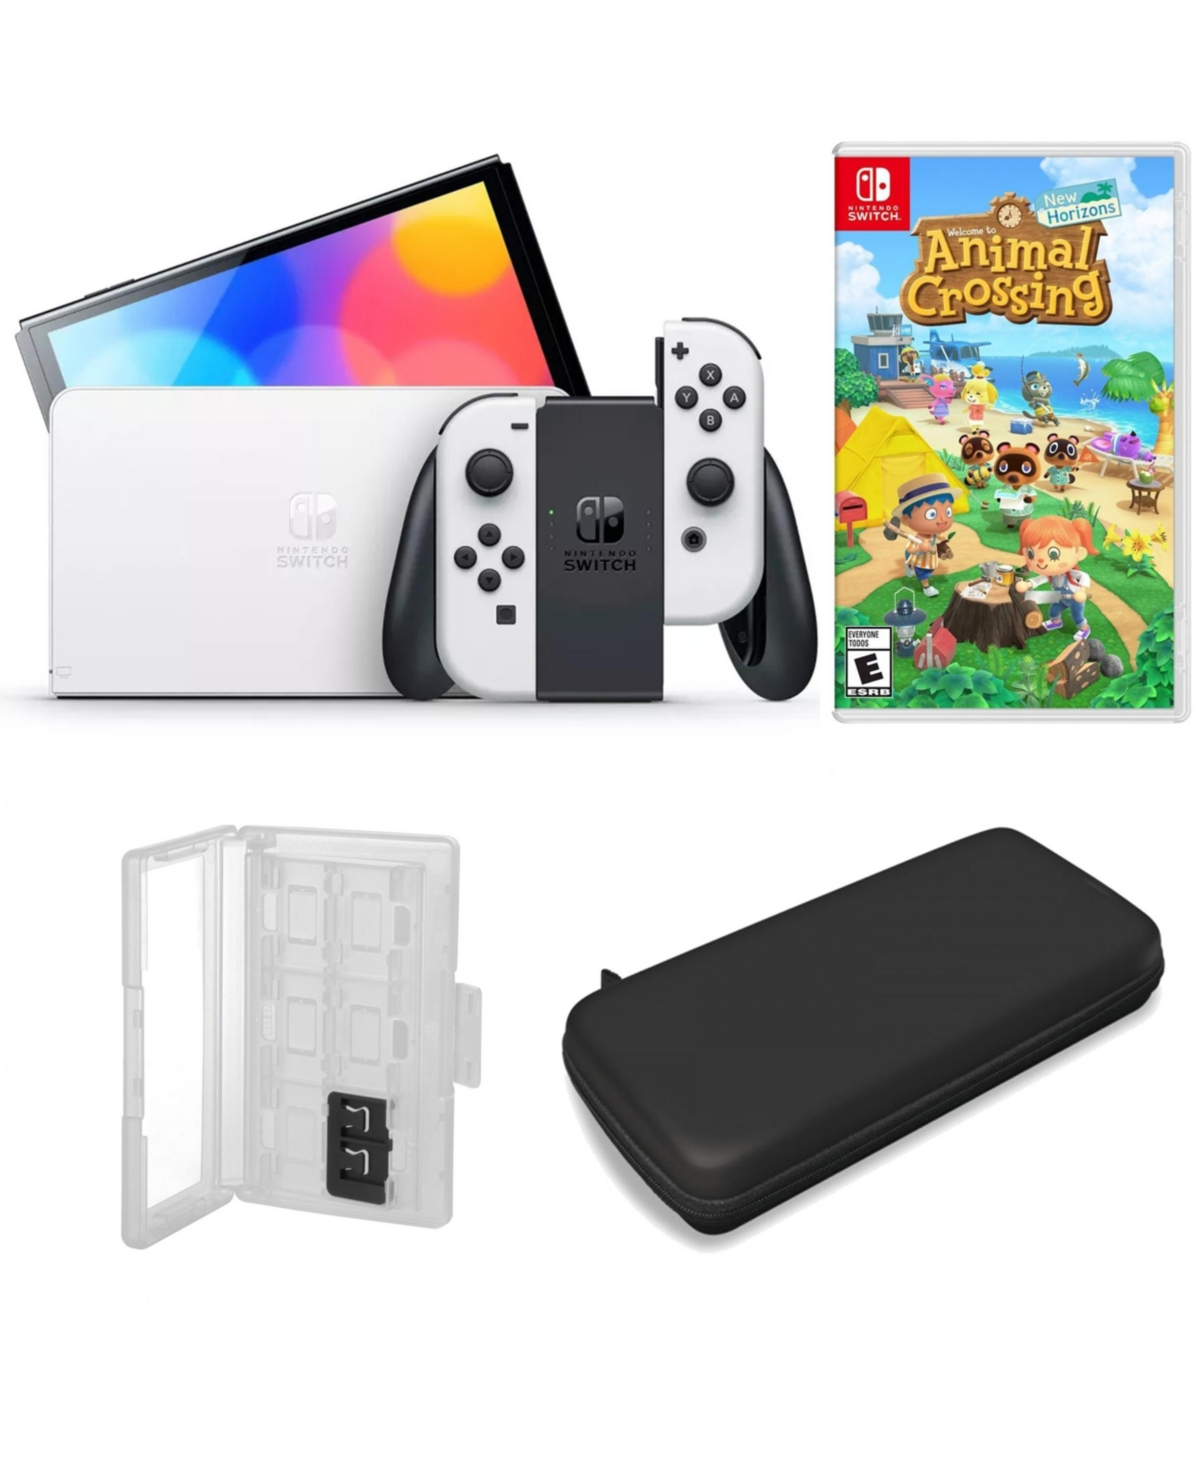 UPC 658580286125 product image for Nintendo Switch Oled in White with Animal Crossing & Accessories | upcitemdb.com